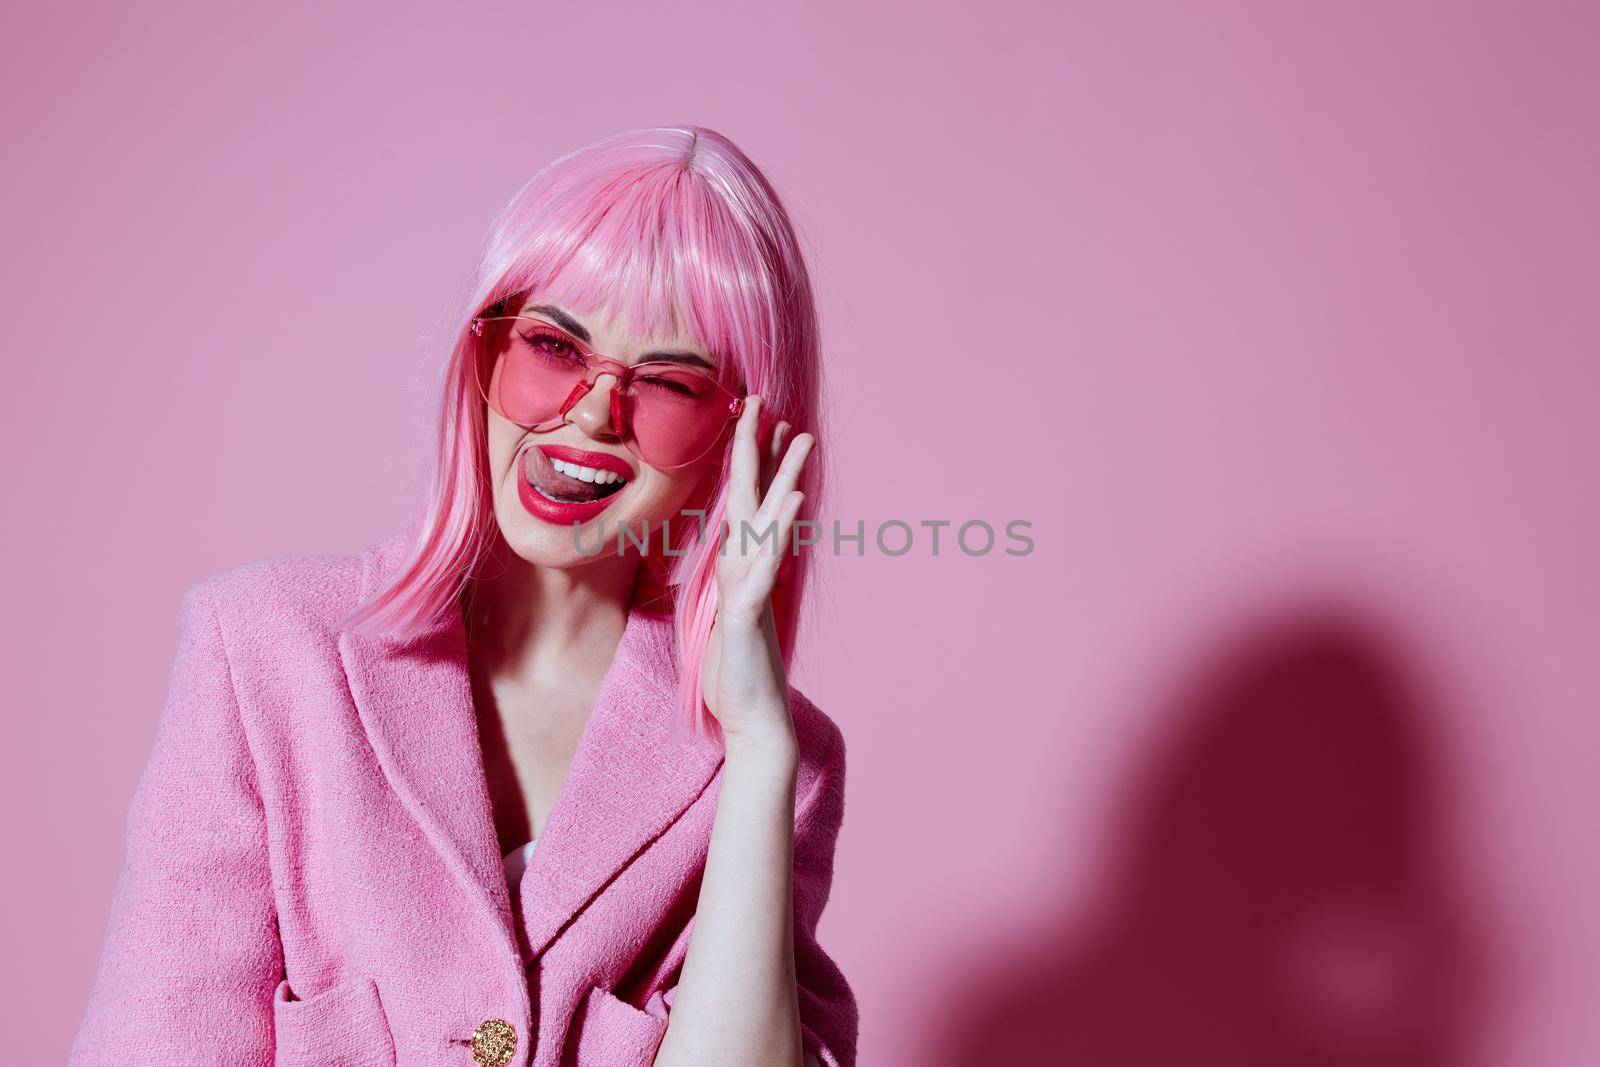 Portrait of a young woman gesturing with hands pink jacket lifestyle glamor pink background unaltered. High quality photo